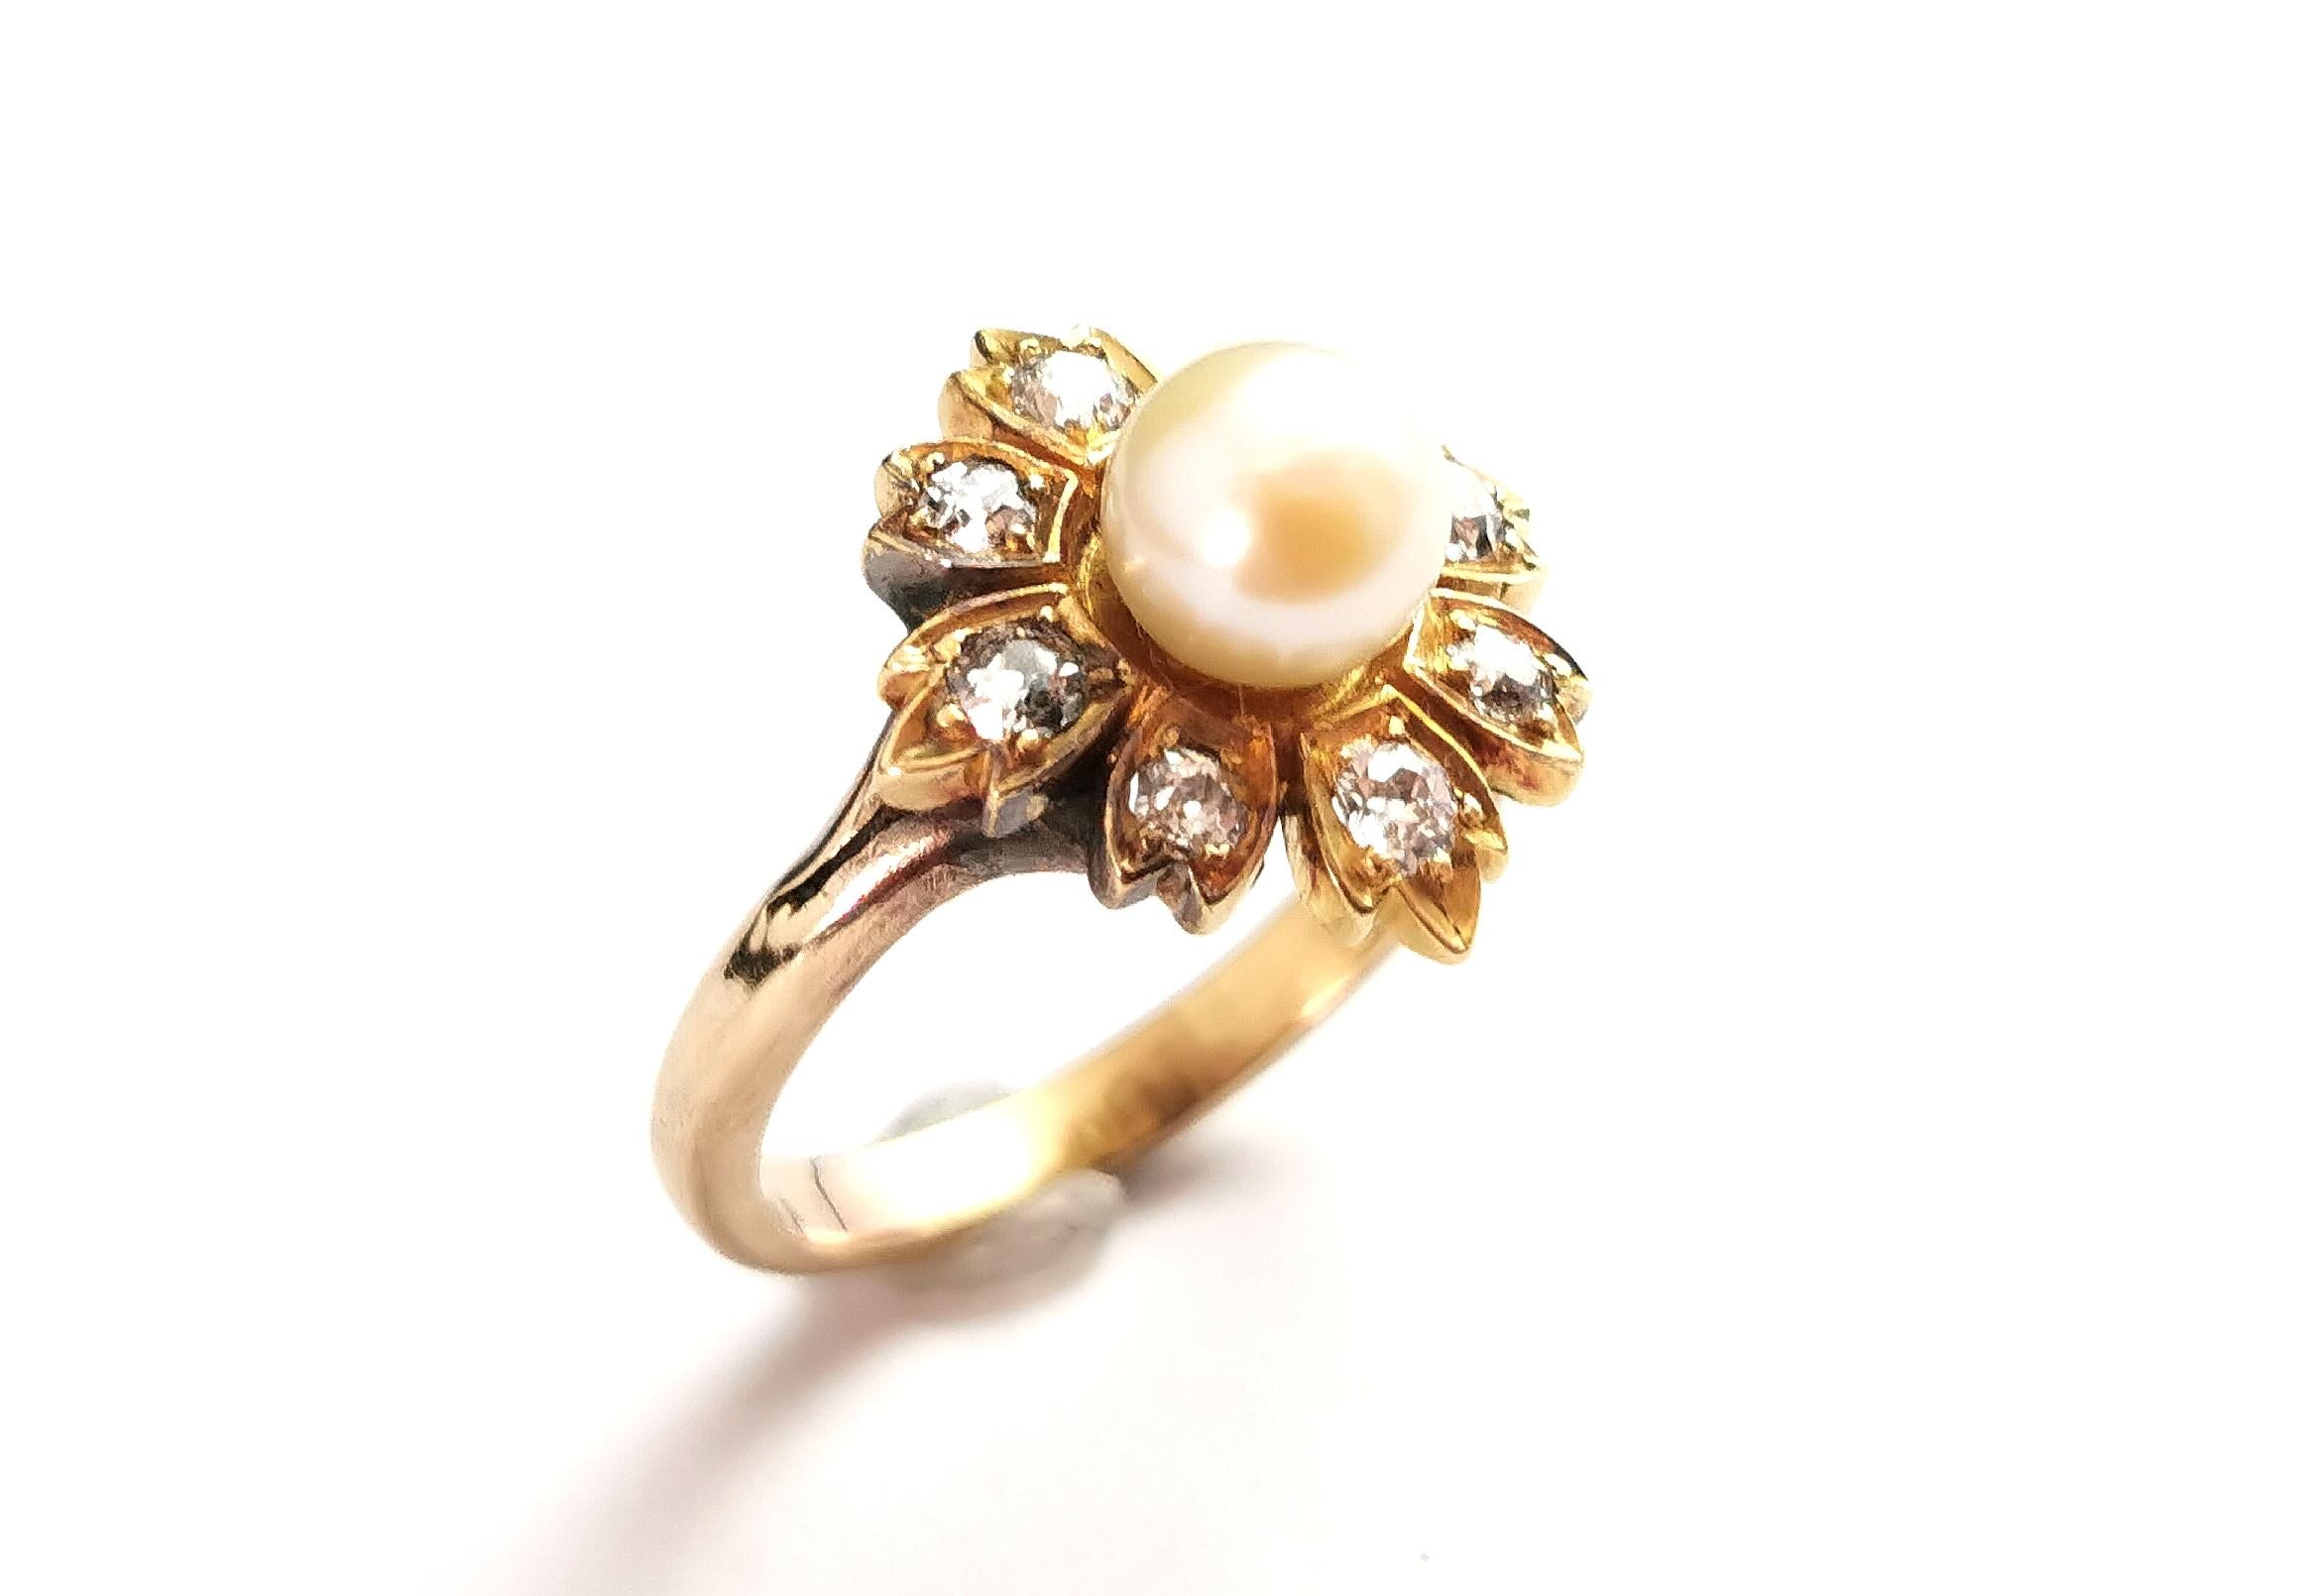 A stunning antique Diamond and pearl flower ring.

A rich 15ct yellow gold flower set with eight sparkling old mine cut diamonds to each petal, approx 0.30ct in total.

It has a lovely single creamy pearl set to the centre of the flower.

Such a